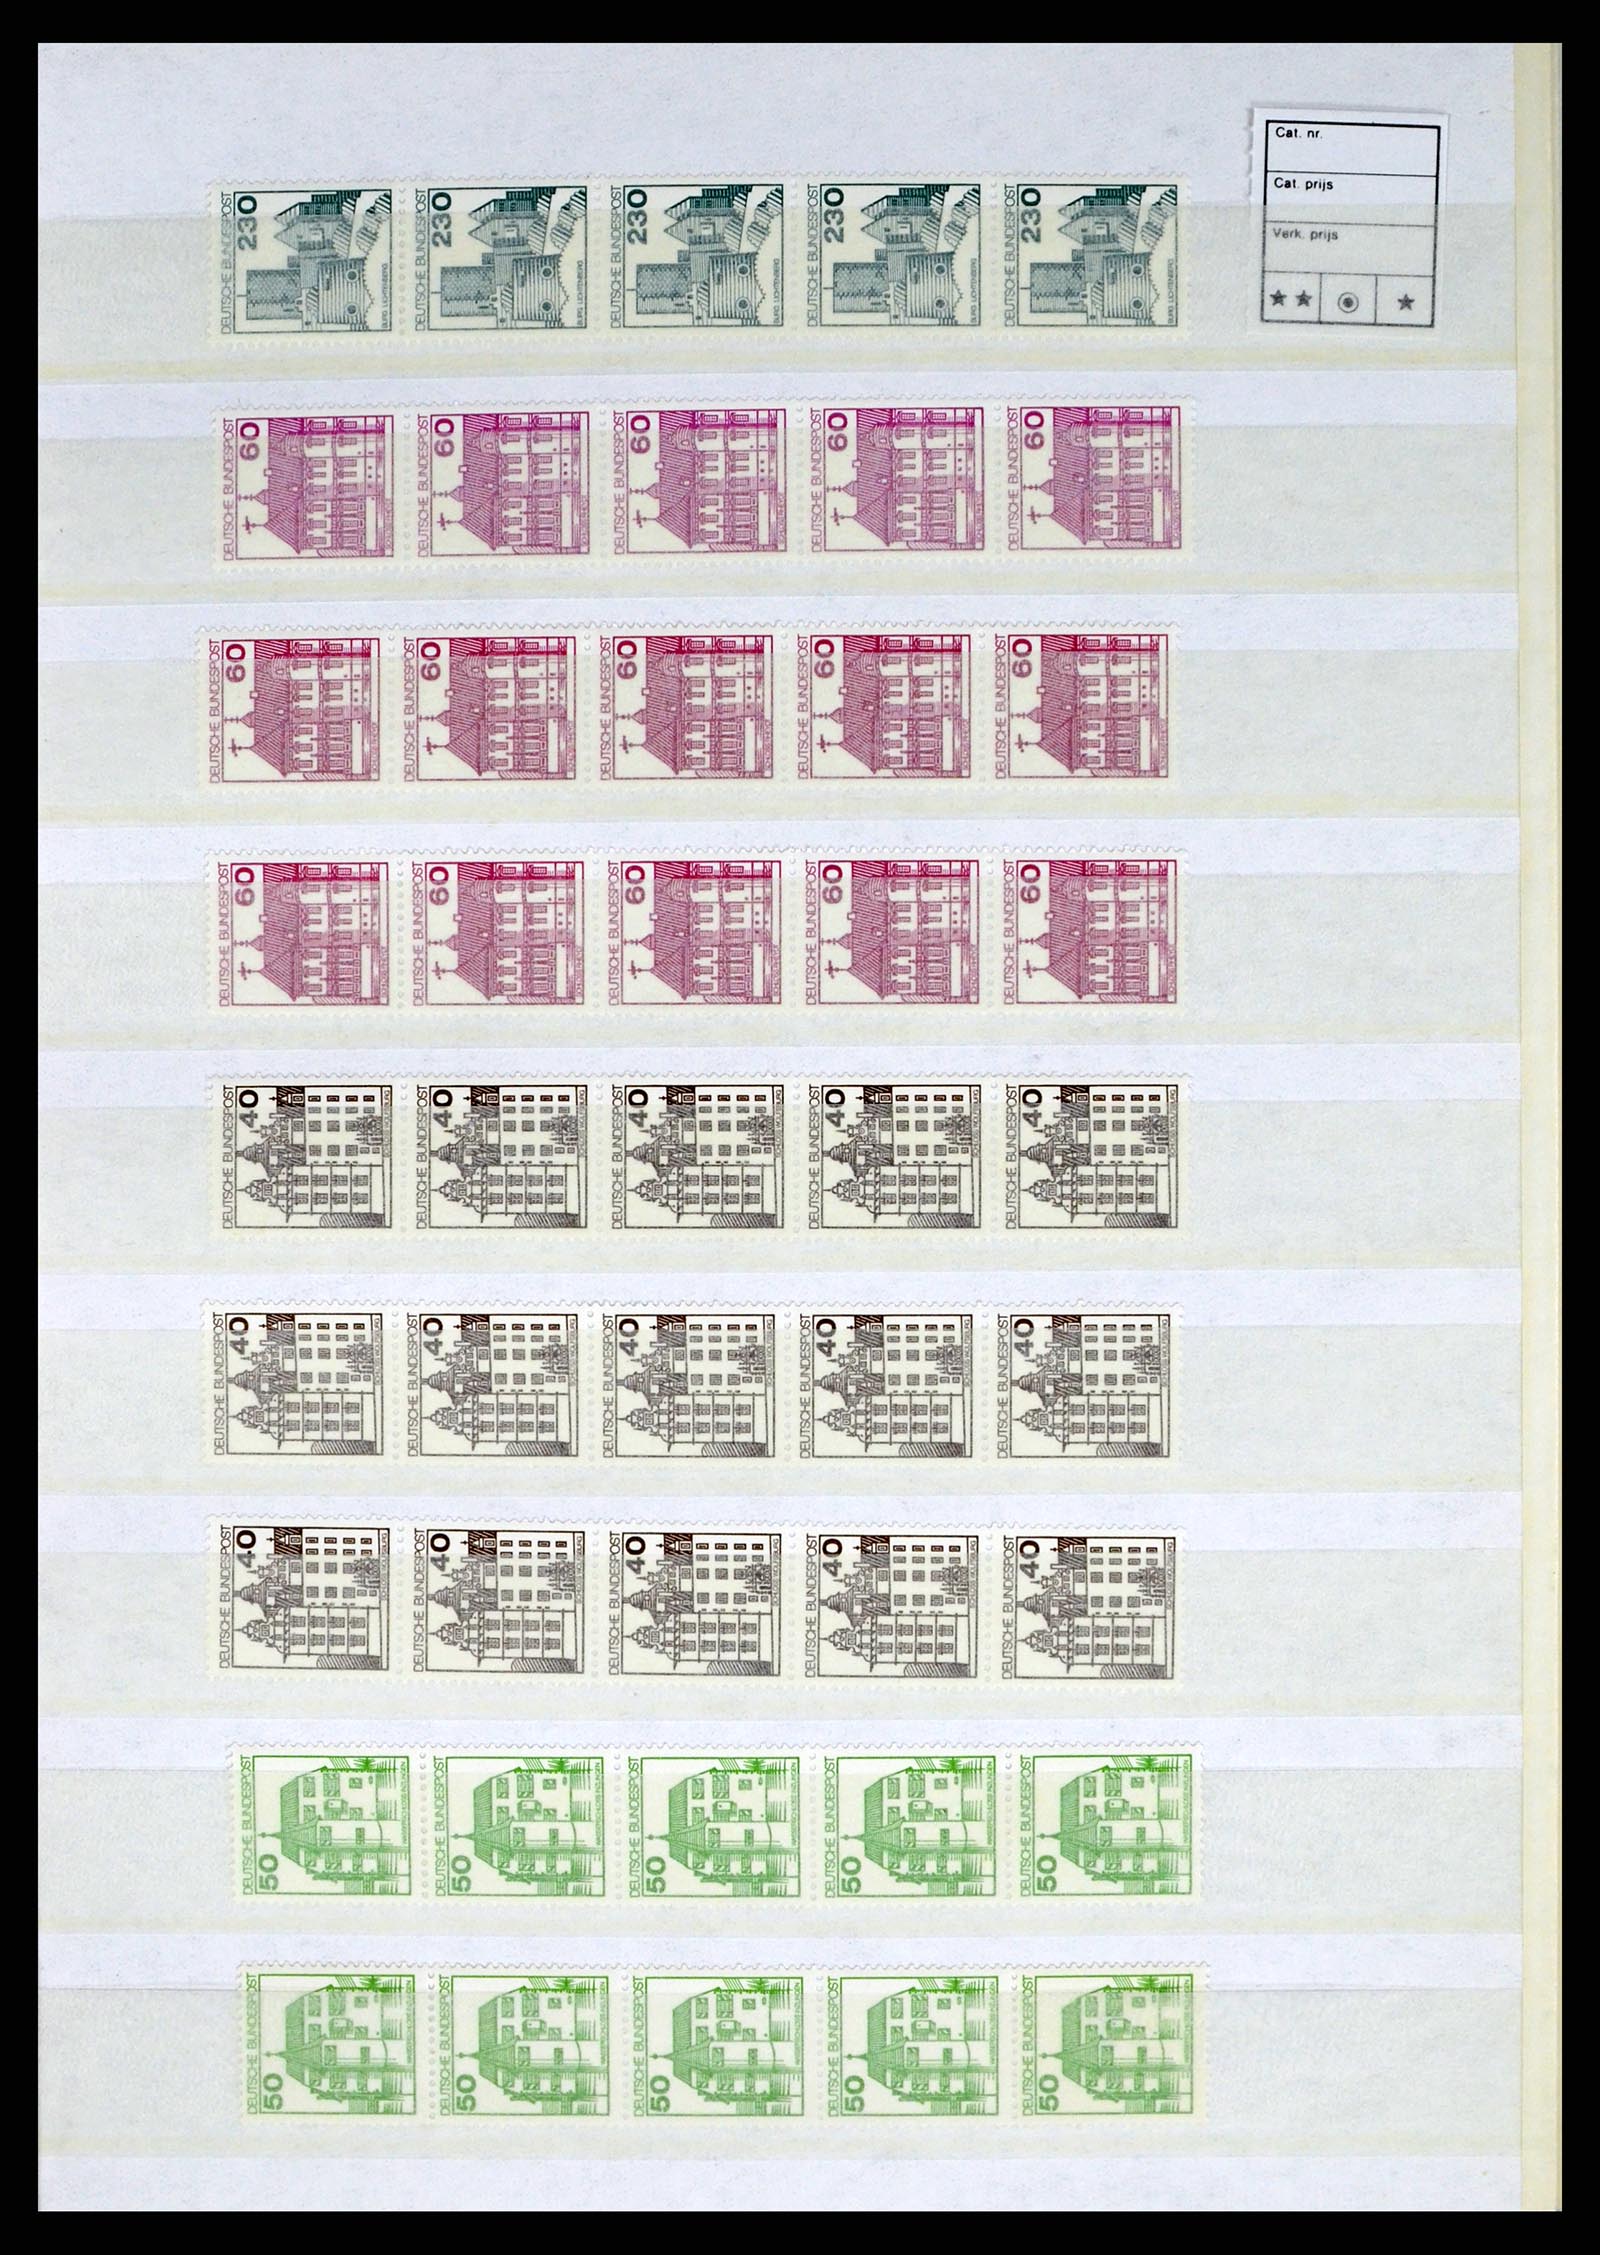 37354 067 - Stamp collection 37354 Bundespost and Berlin 1955-2000.